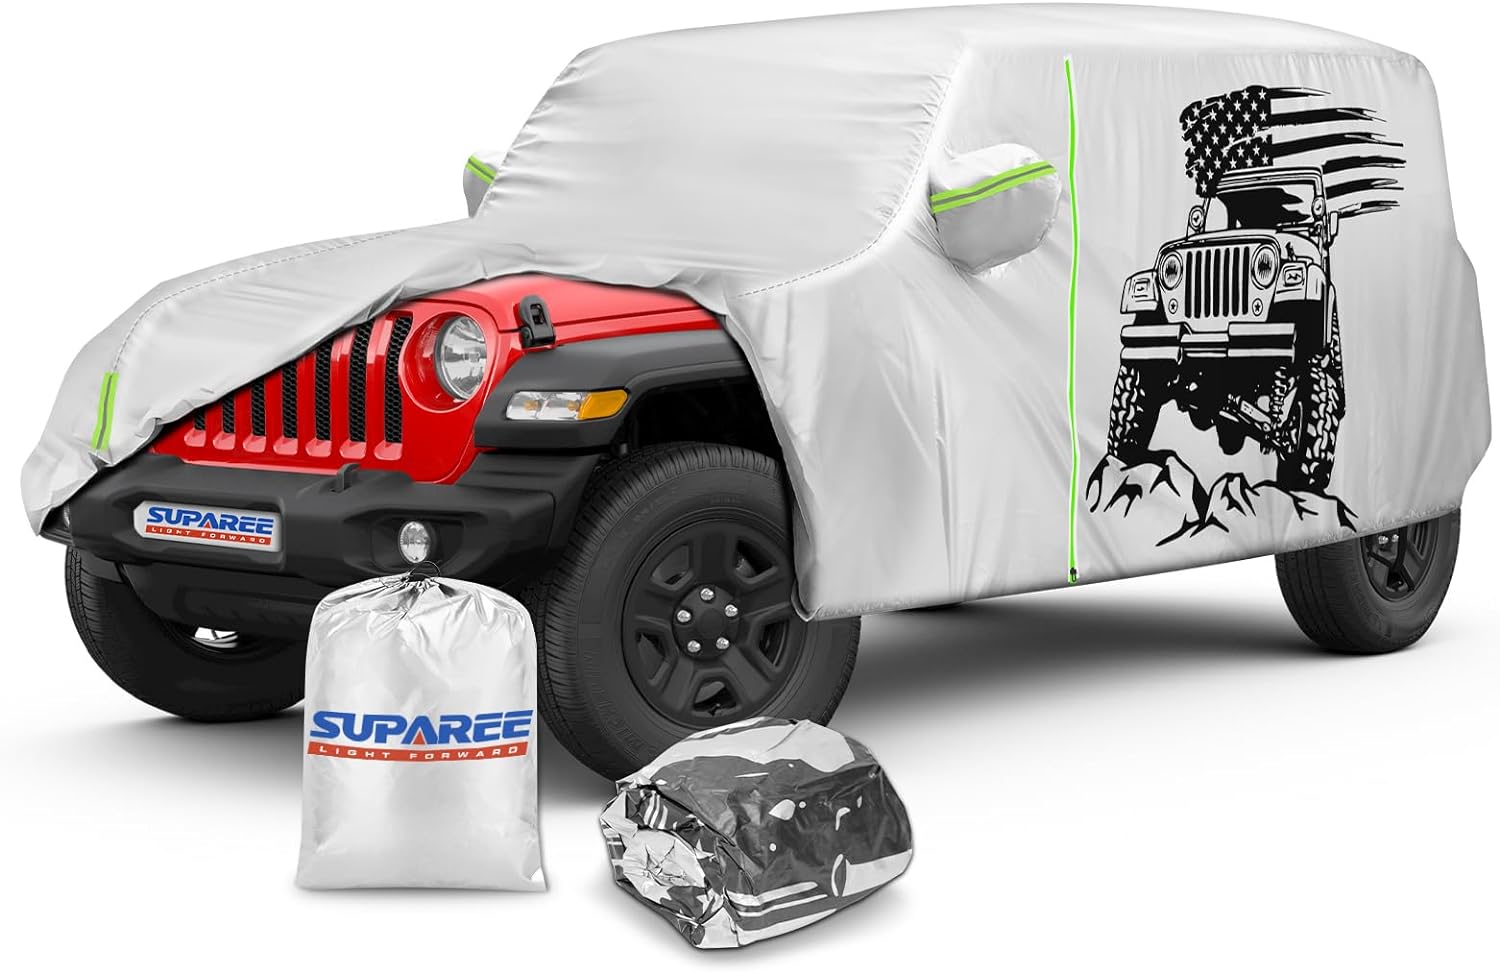 SUPAREE Jeep Cover Suparee New Jeep Cover Waterproof for 2007-Later Wrangler JK JL 4 Door Product description